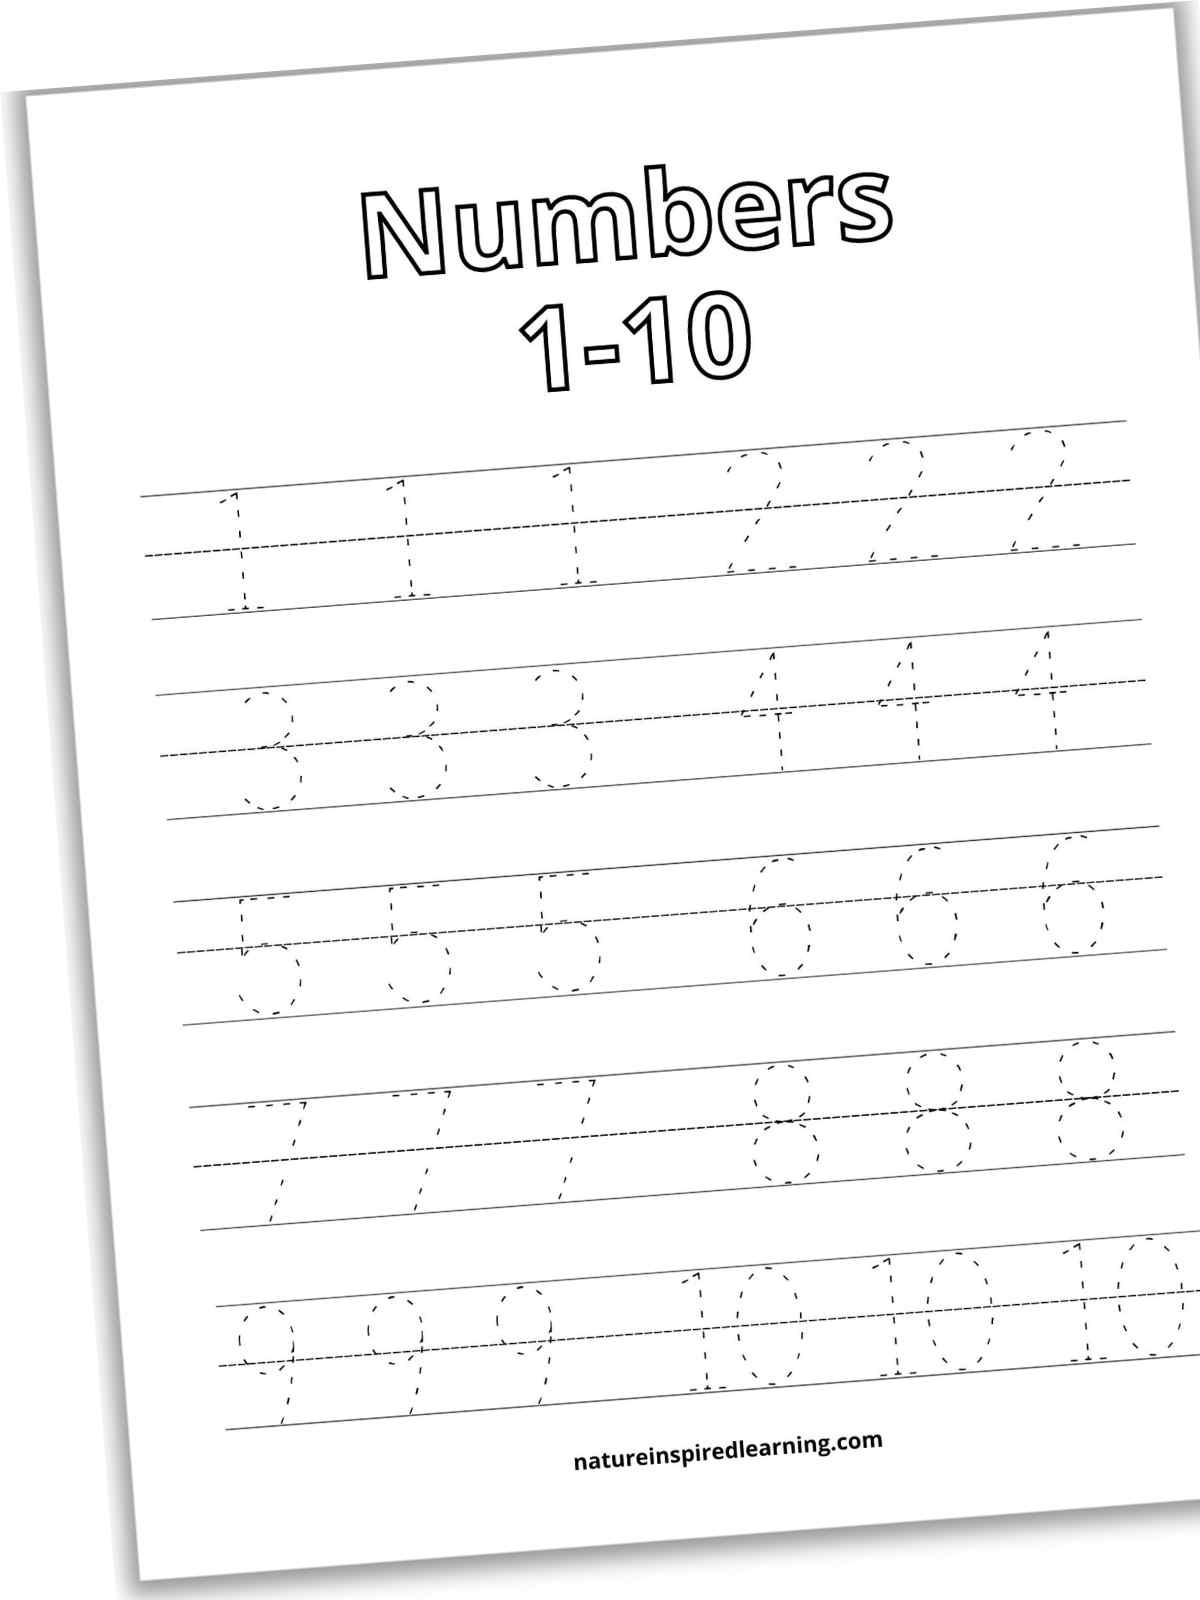 slanted worksheet with numbers 1-10 written in outline form across the top and five rows of lines with traceable numbers 1 through 10 on the lines. Three of each number on the worksheet.